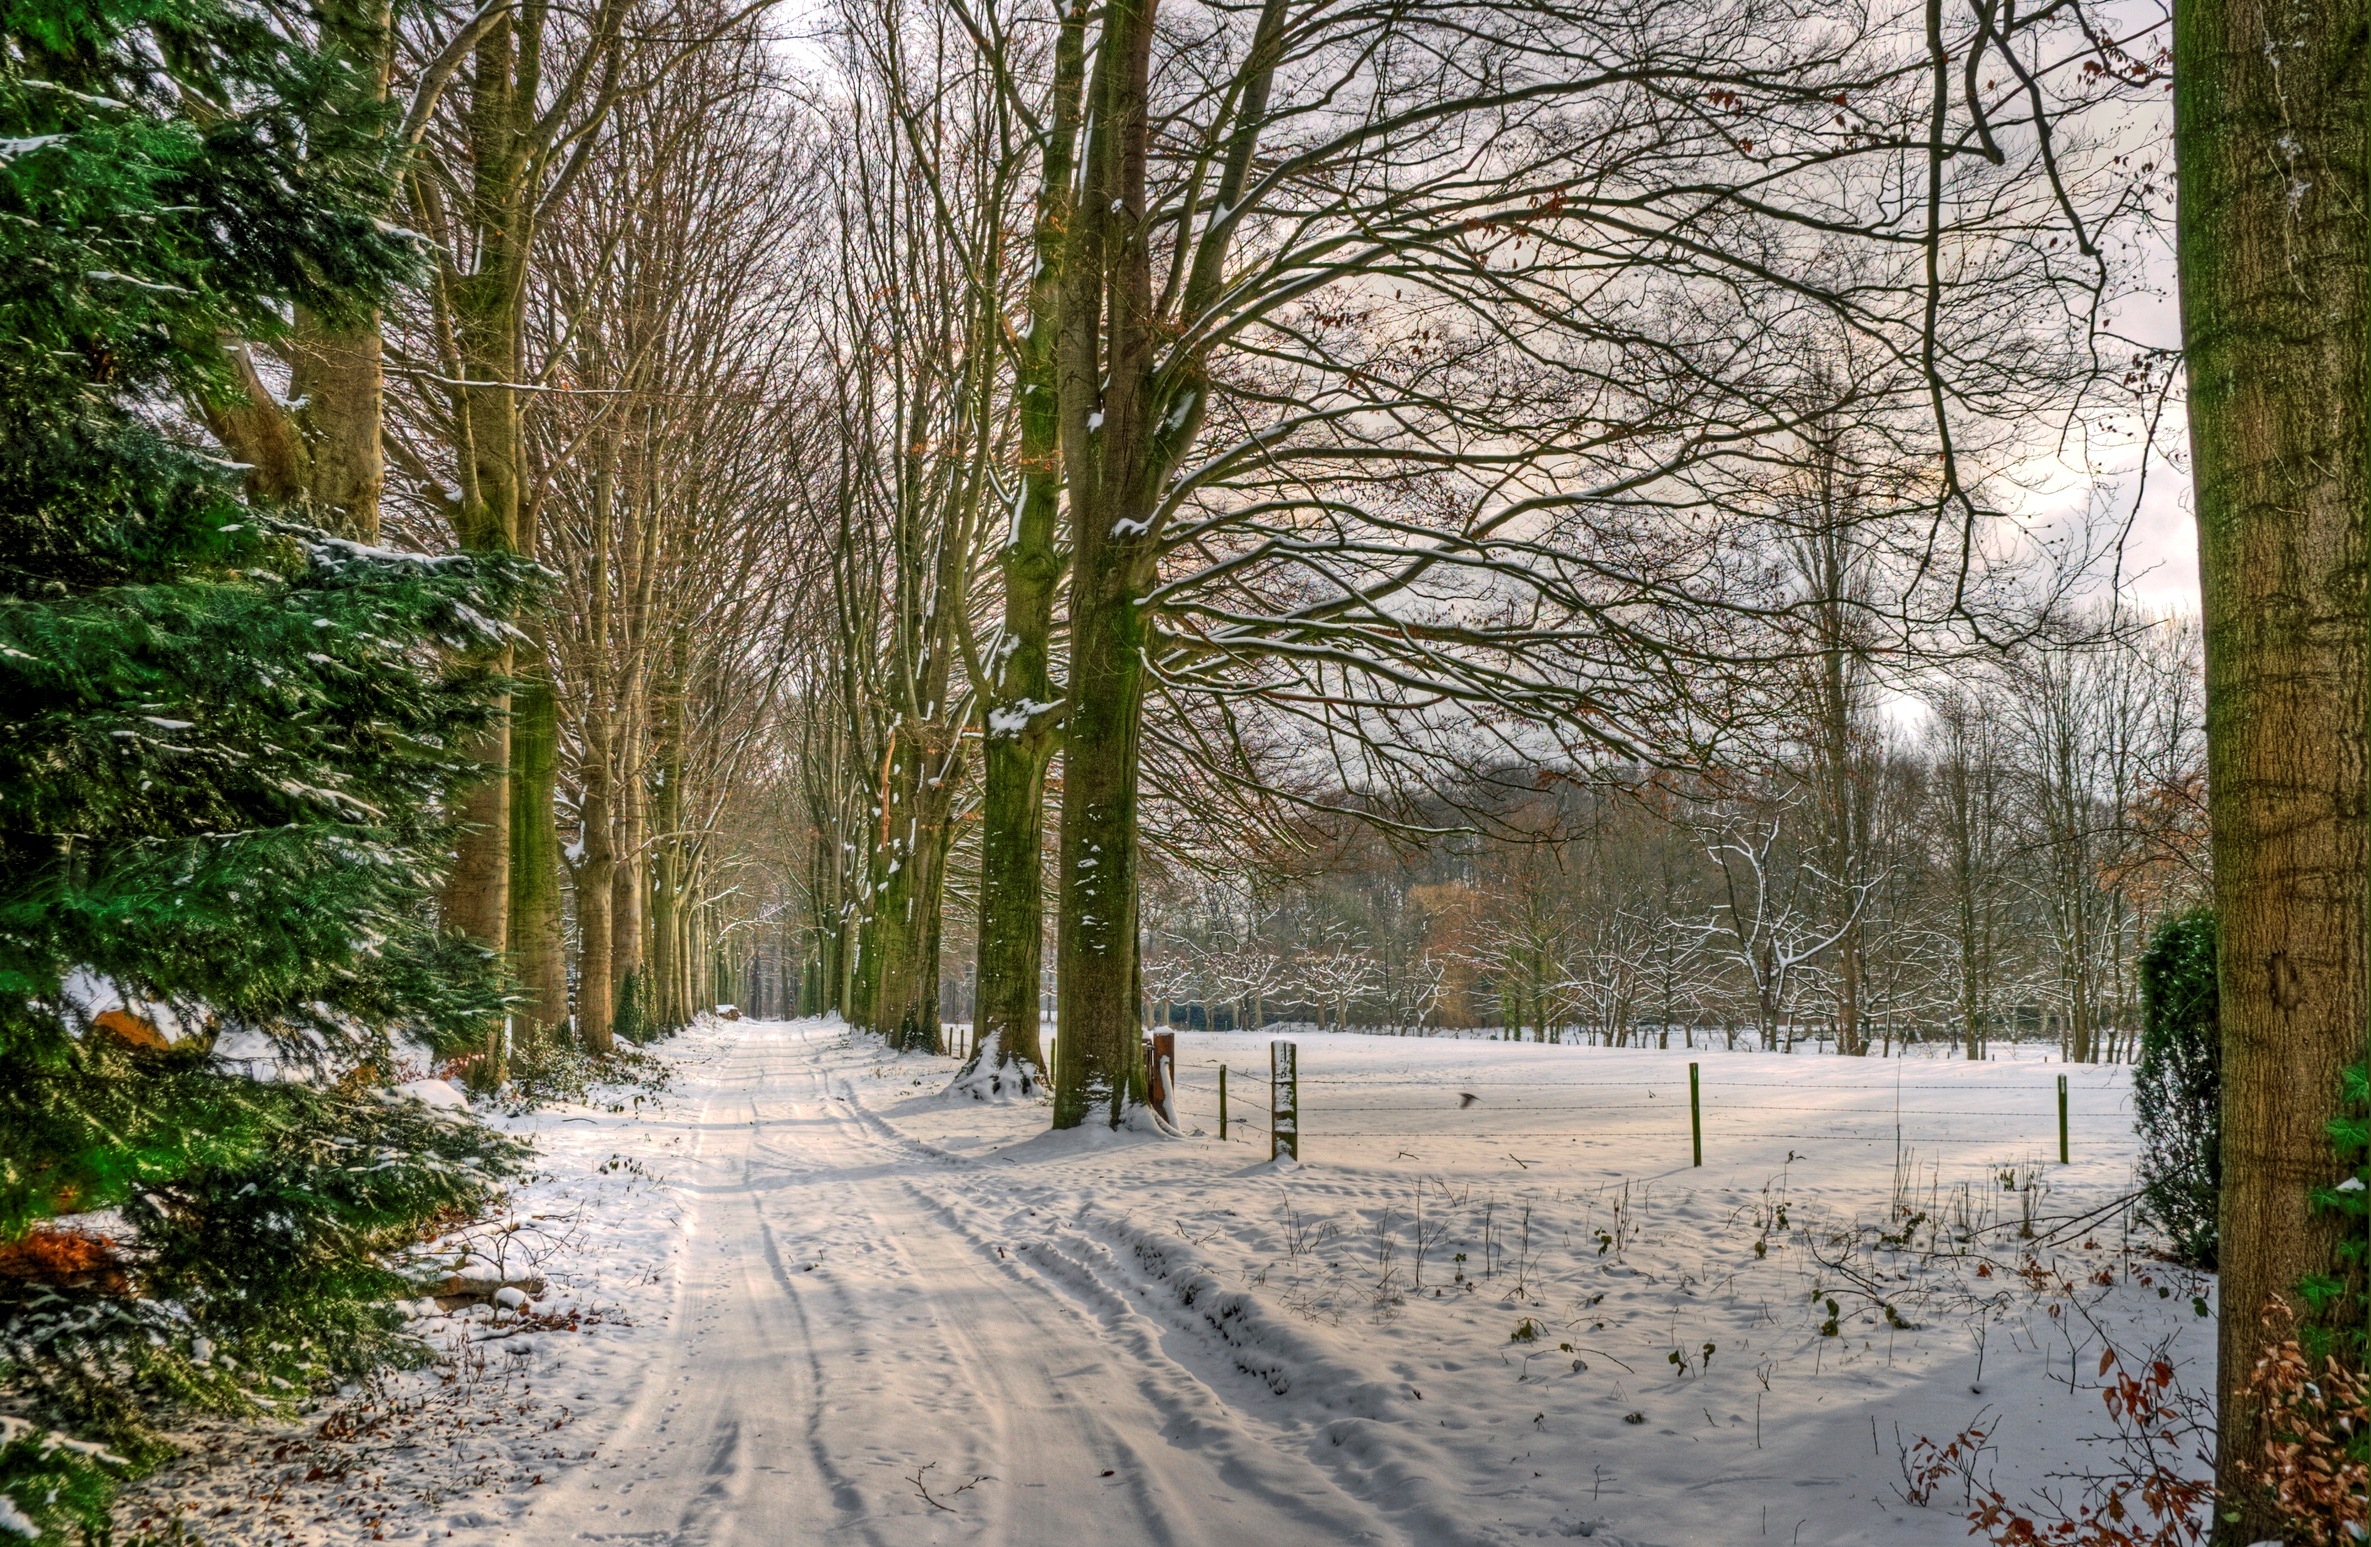 snow, nature, trees, road, alley, netherlands